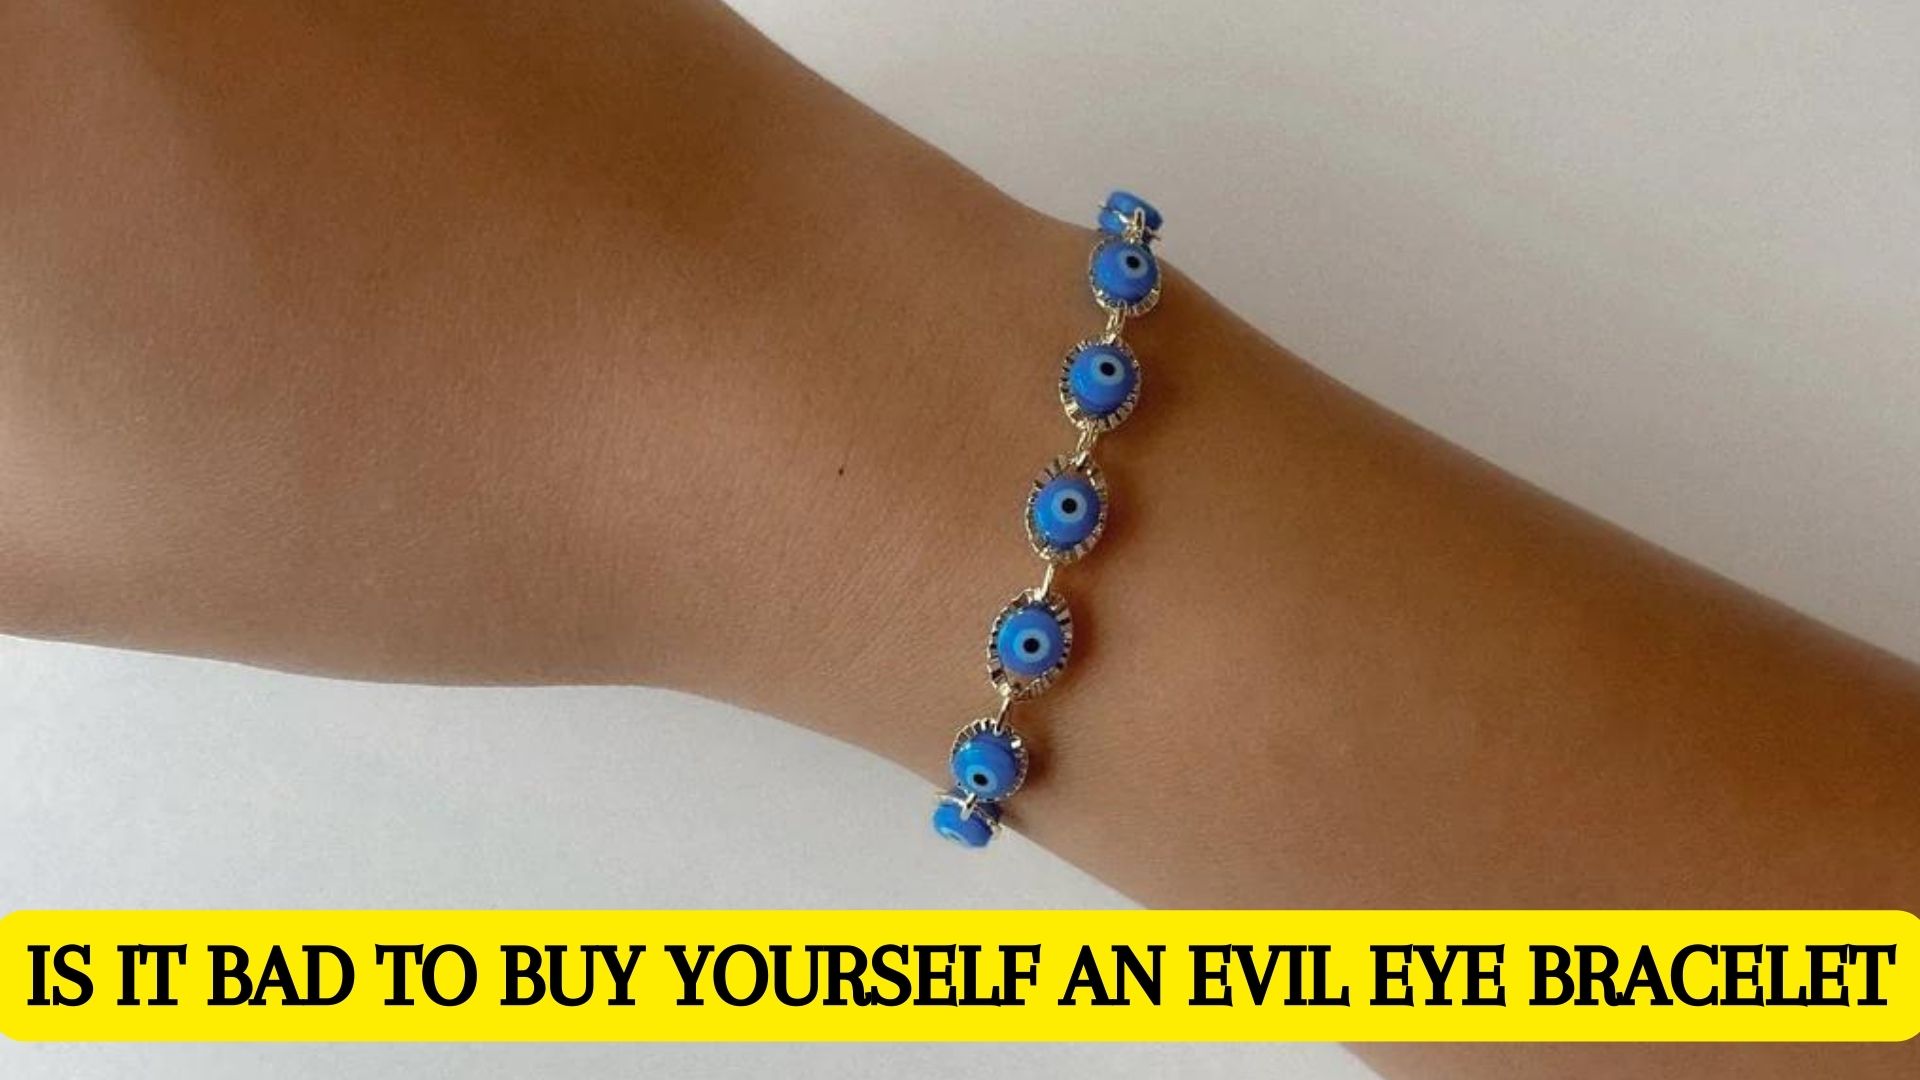 Is It Bad To Buy Yourself An Evil Eye Bracelet? - A Sign Of Bad Luck